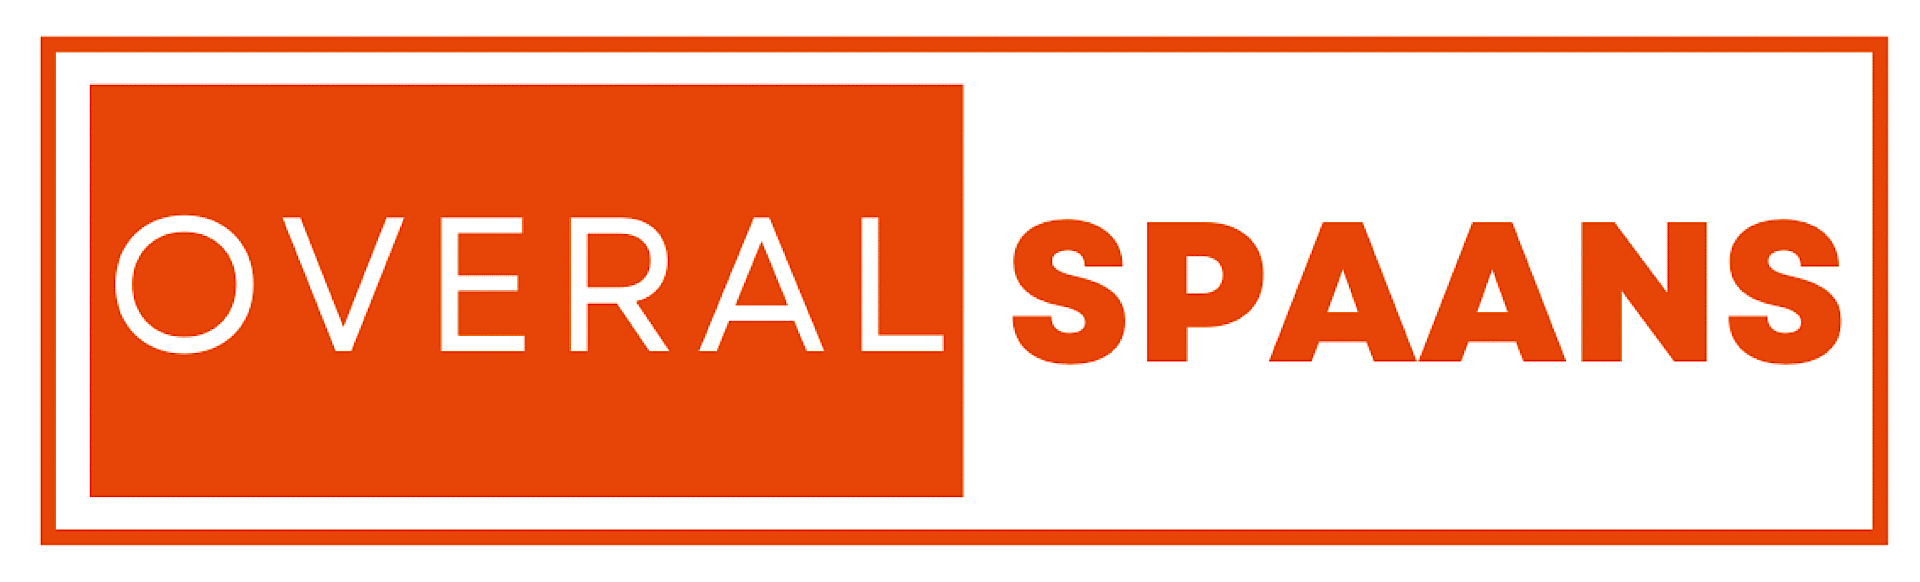 logo-overal-spaans